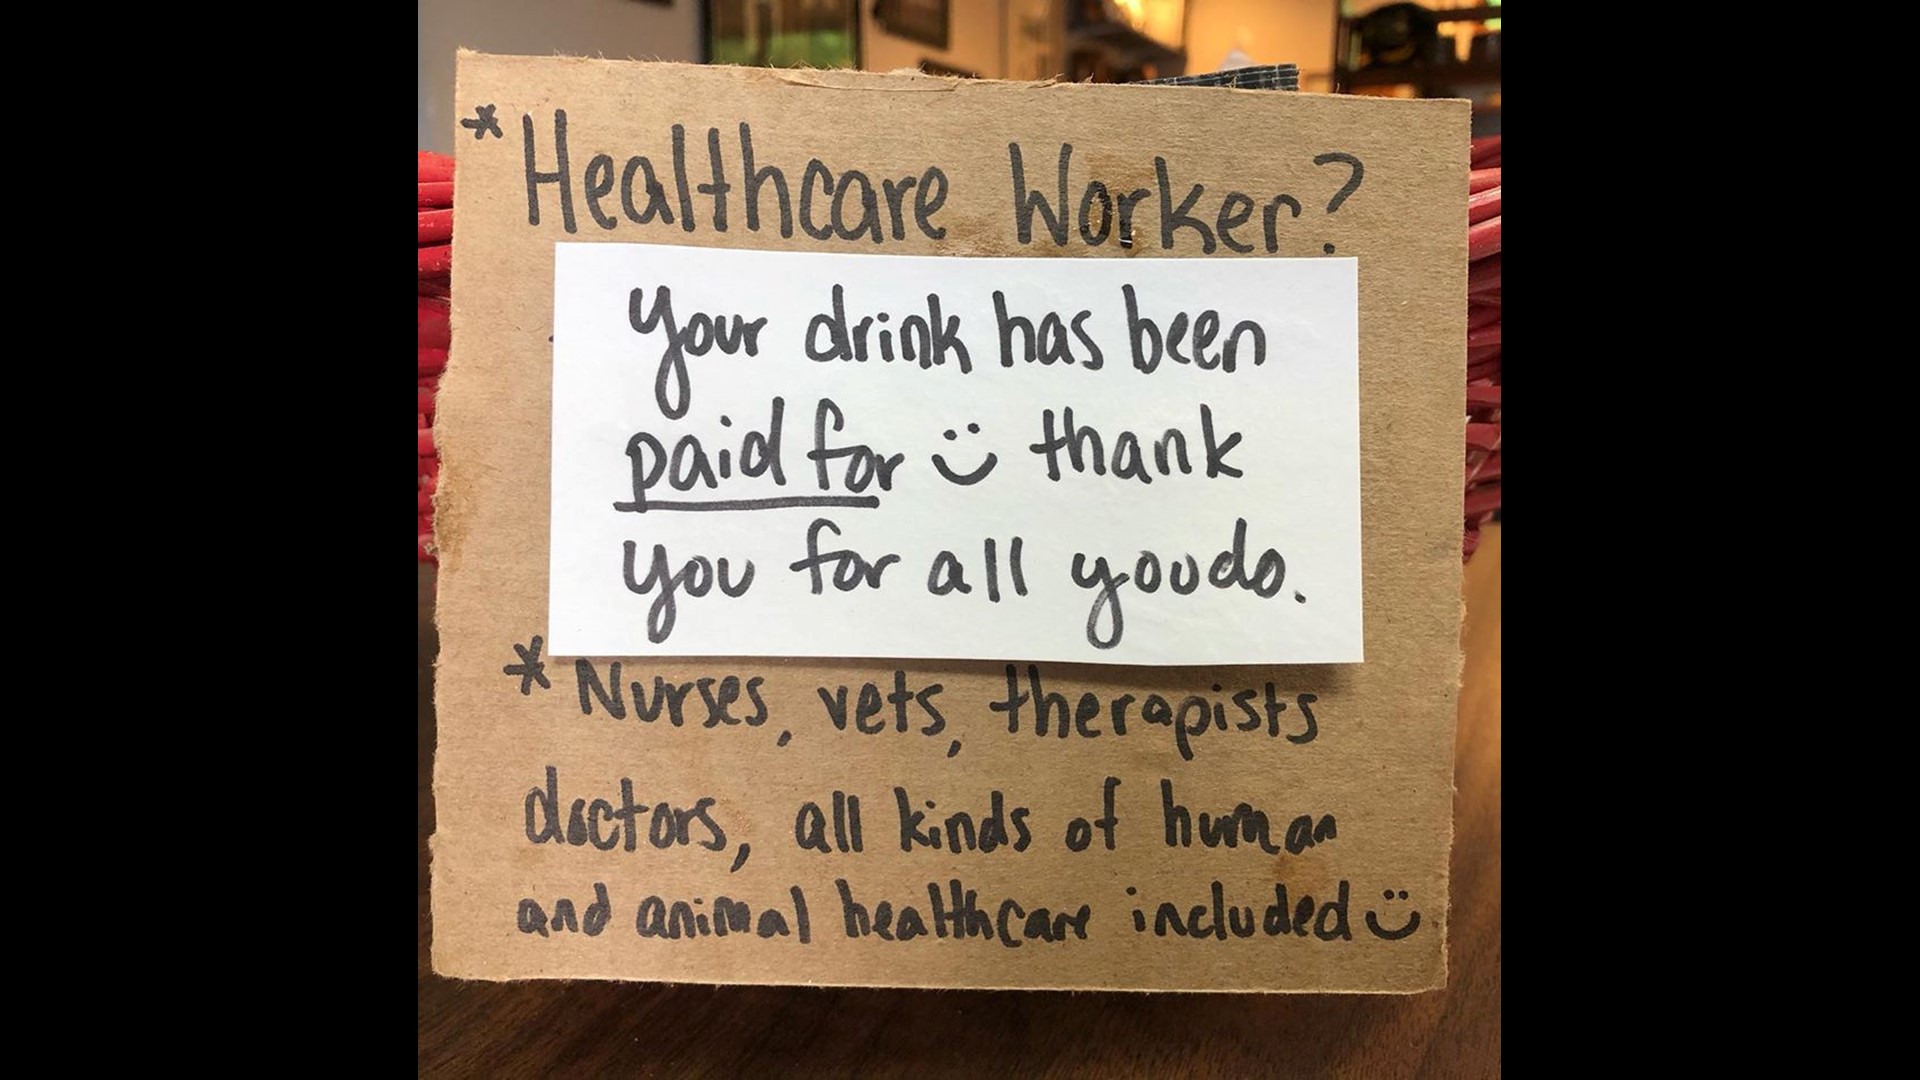 Waller’s Coffee Shop in Decatur is giving free coffee to health care workers.